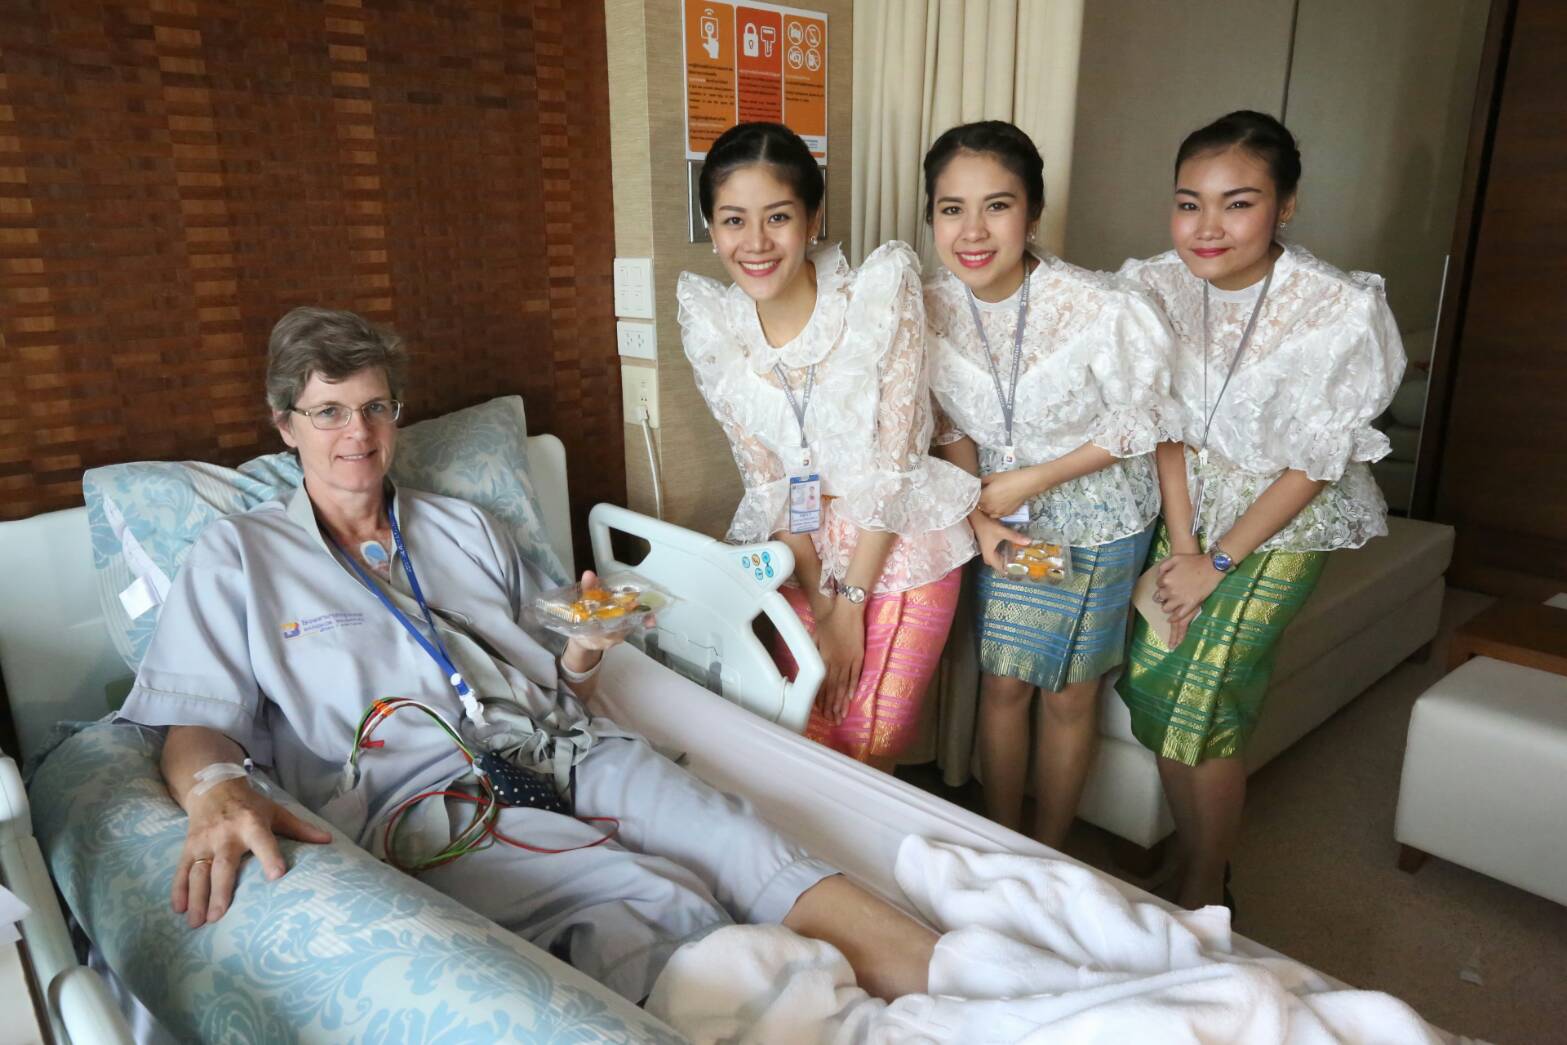 Bangkok Hospital Pattaya brought some early Thai New Year’s cheer to patients with free “lucky” sweets.